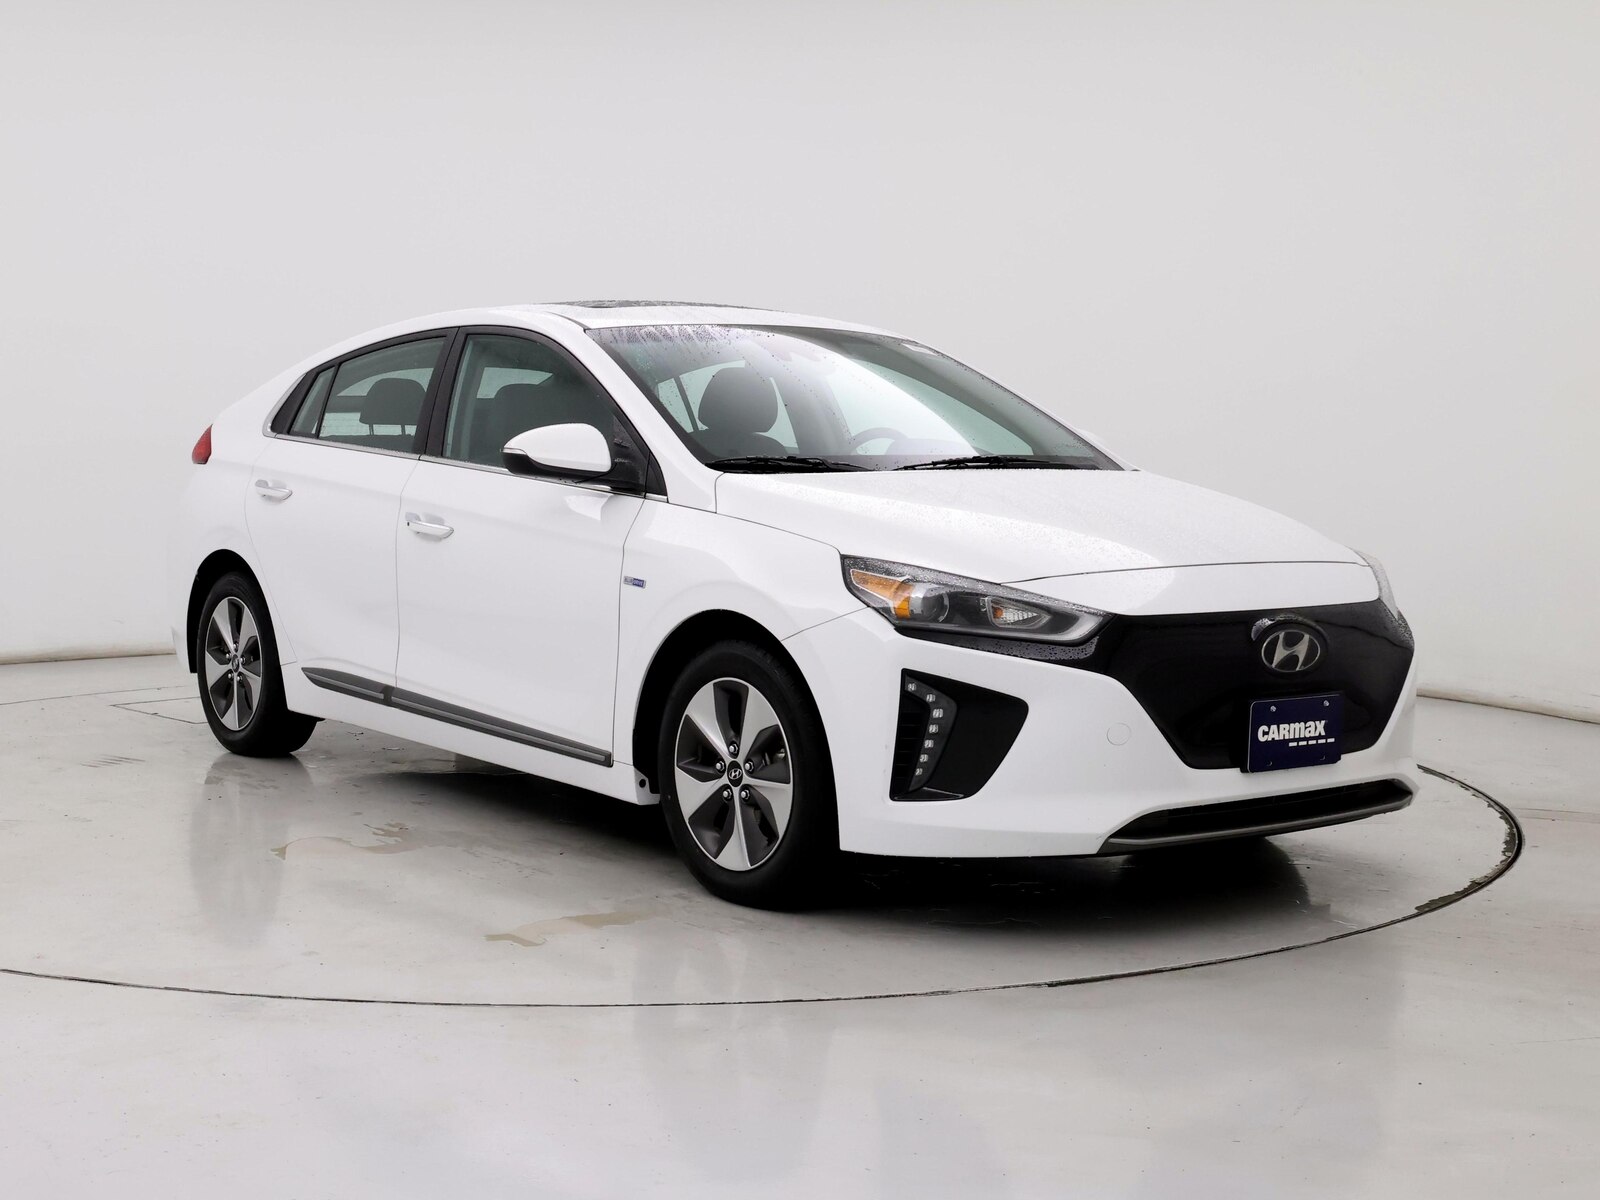 Used 2019 Hyundai Ioniq Limited with VIN KMHC05LHXKU052285 for sale in Kenosha, WI